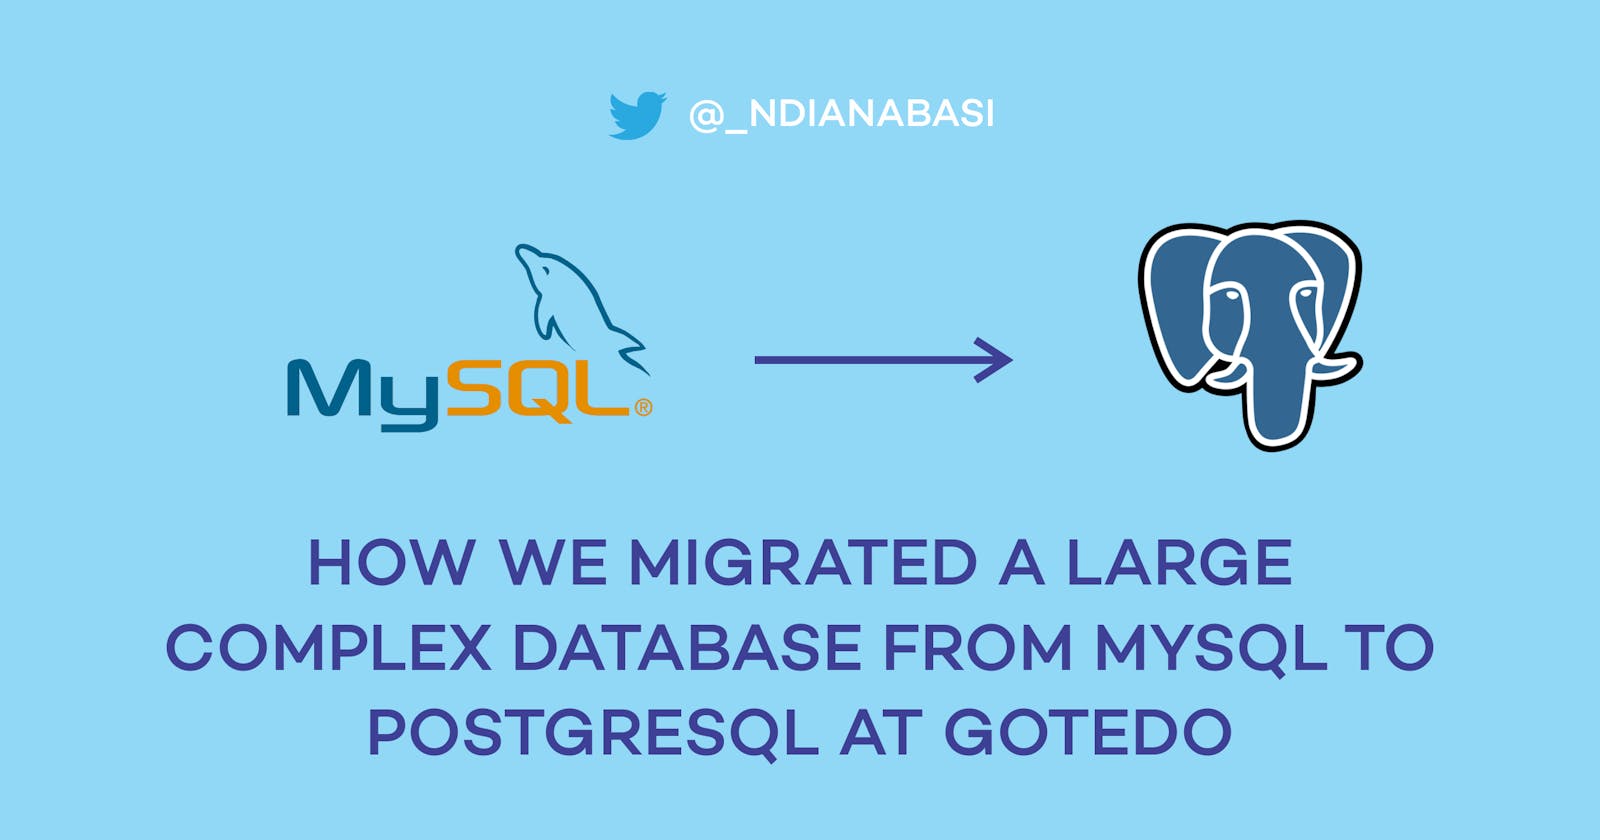 How We Migrated a Large Complex Database from MySQL to PostgreSQL at Gotedo